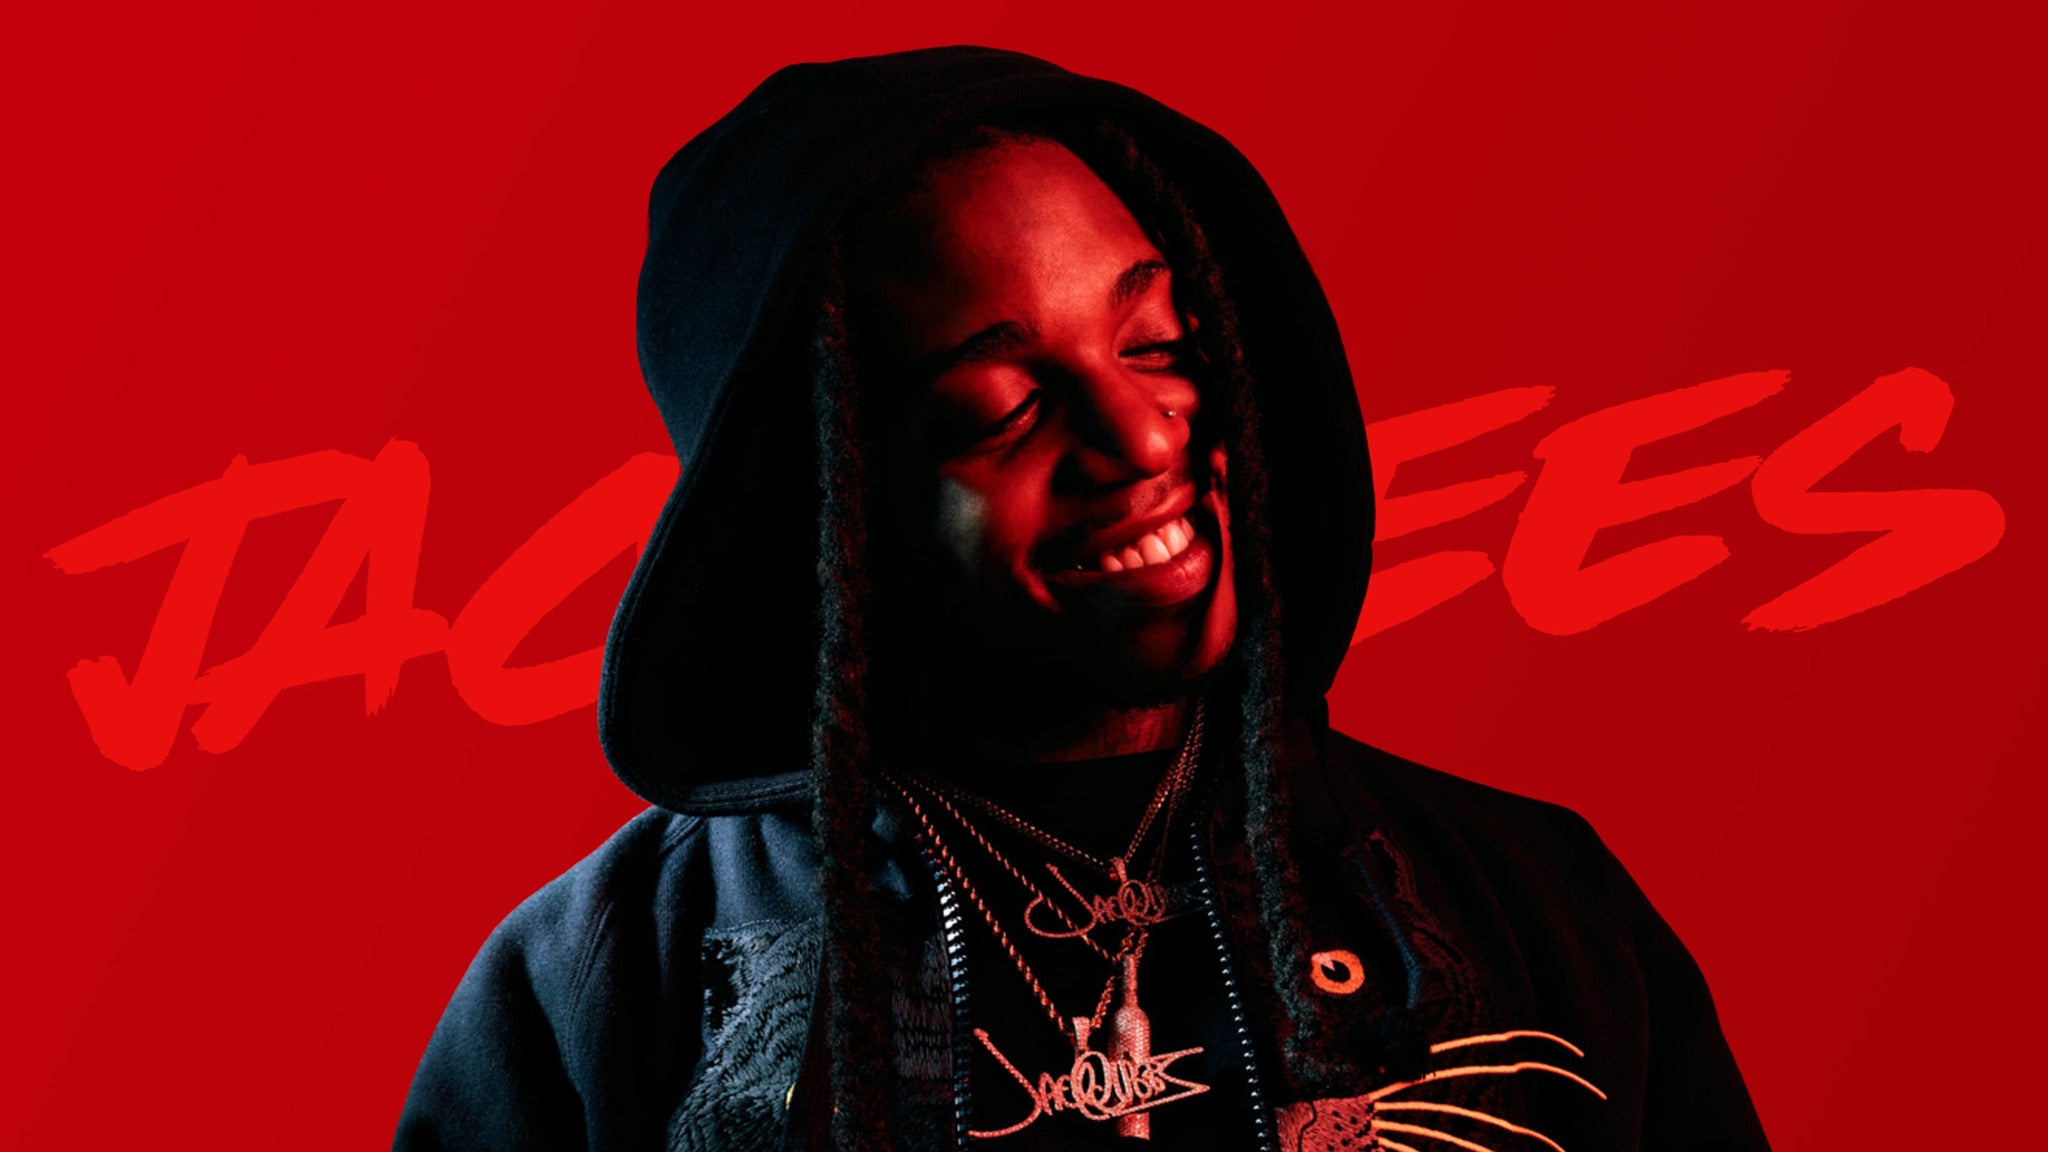 Jacquees Live In Concert at O2 Academy Leeds on Sat 28th December 2019